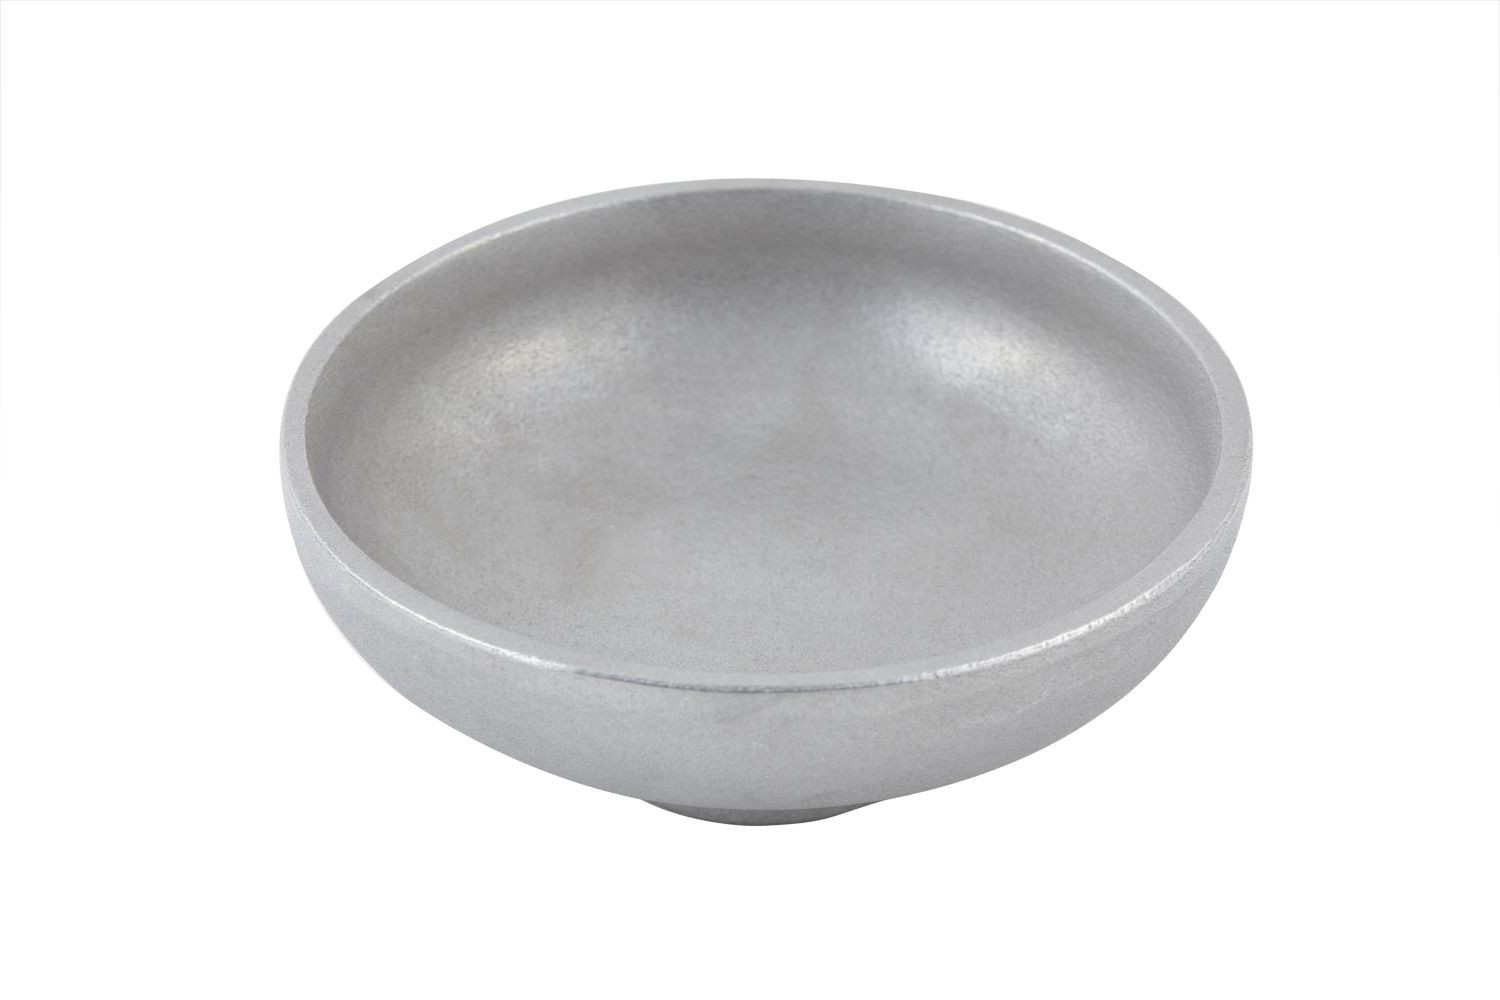 Bon Chef 15003P Cover for Sugar Bowl 15003, Pewter Glo 4 3/4" Dia., Set of 6